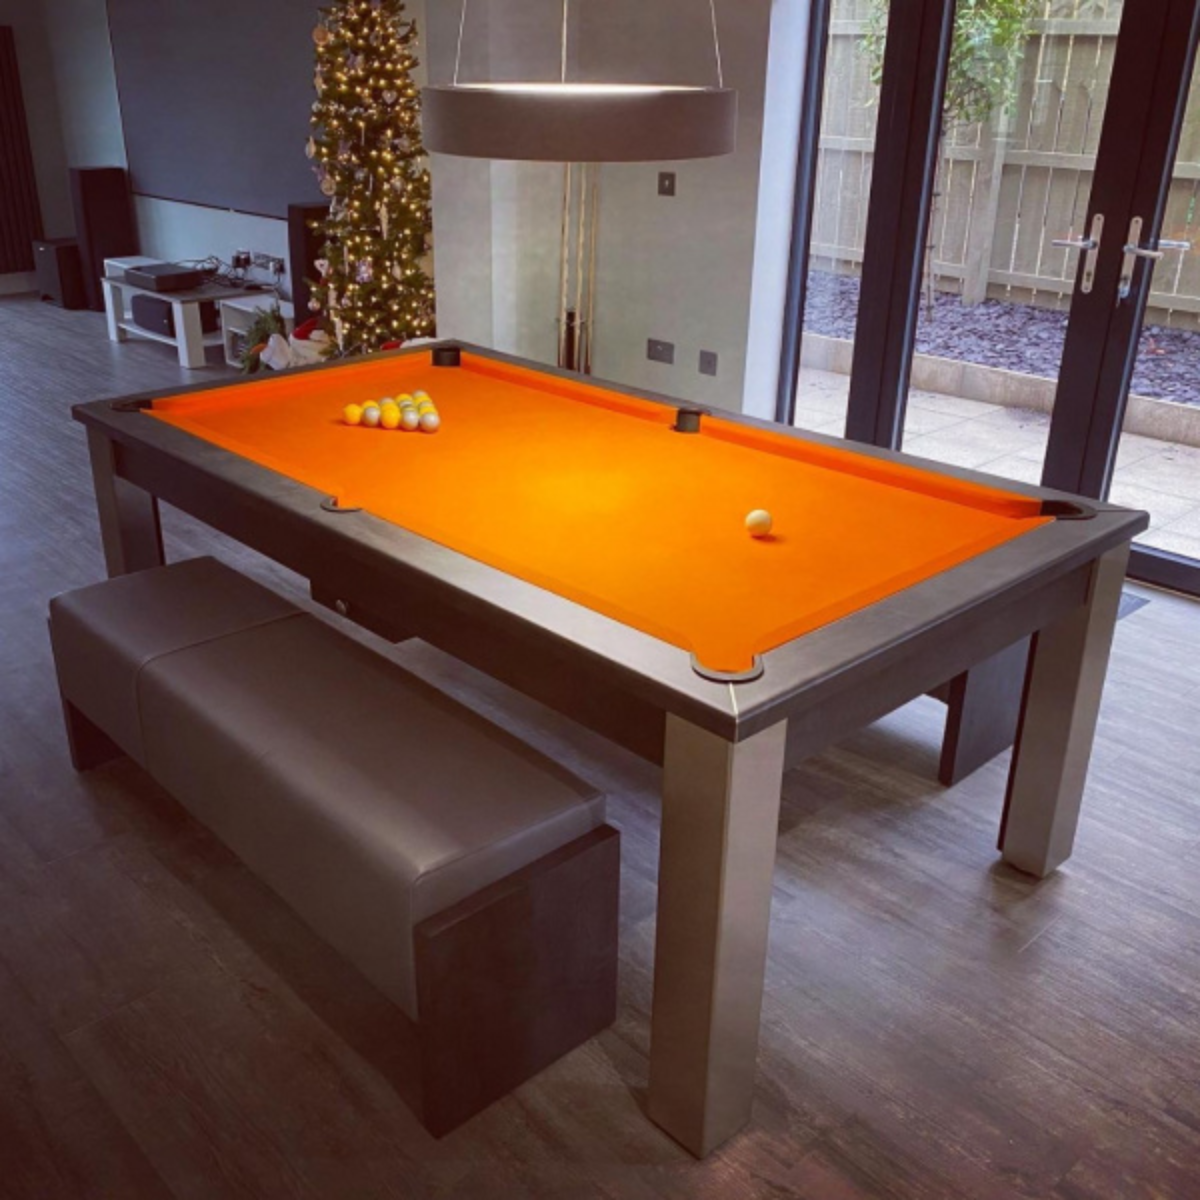 The Elixir 6ft & 7ft British Pool Table W/Dining Top Anthracite Slate